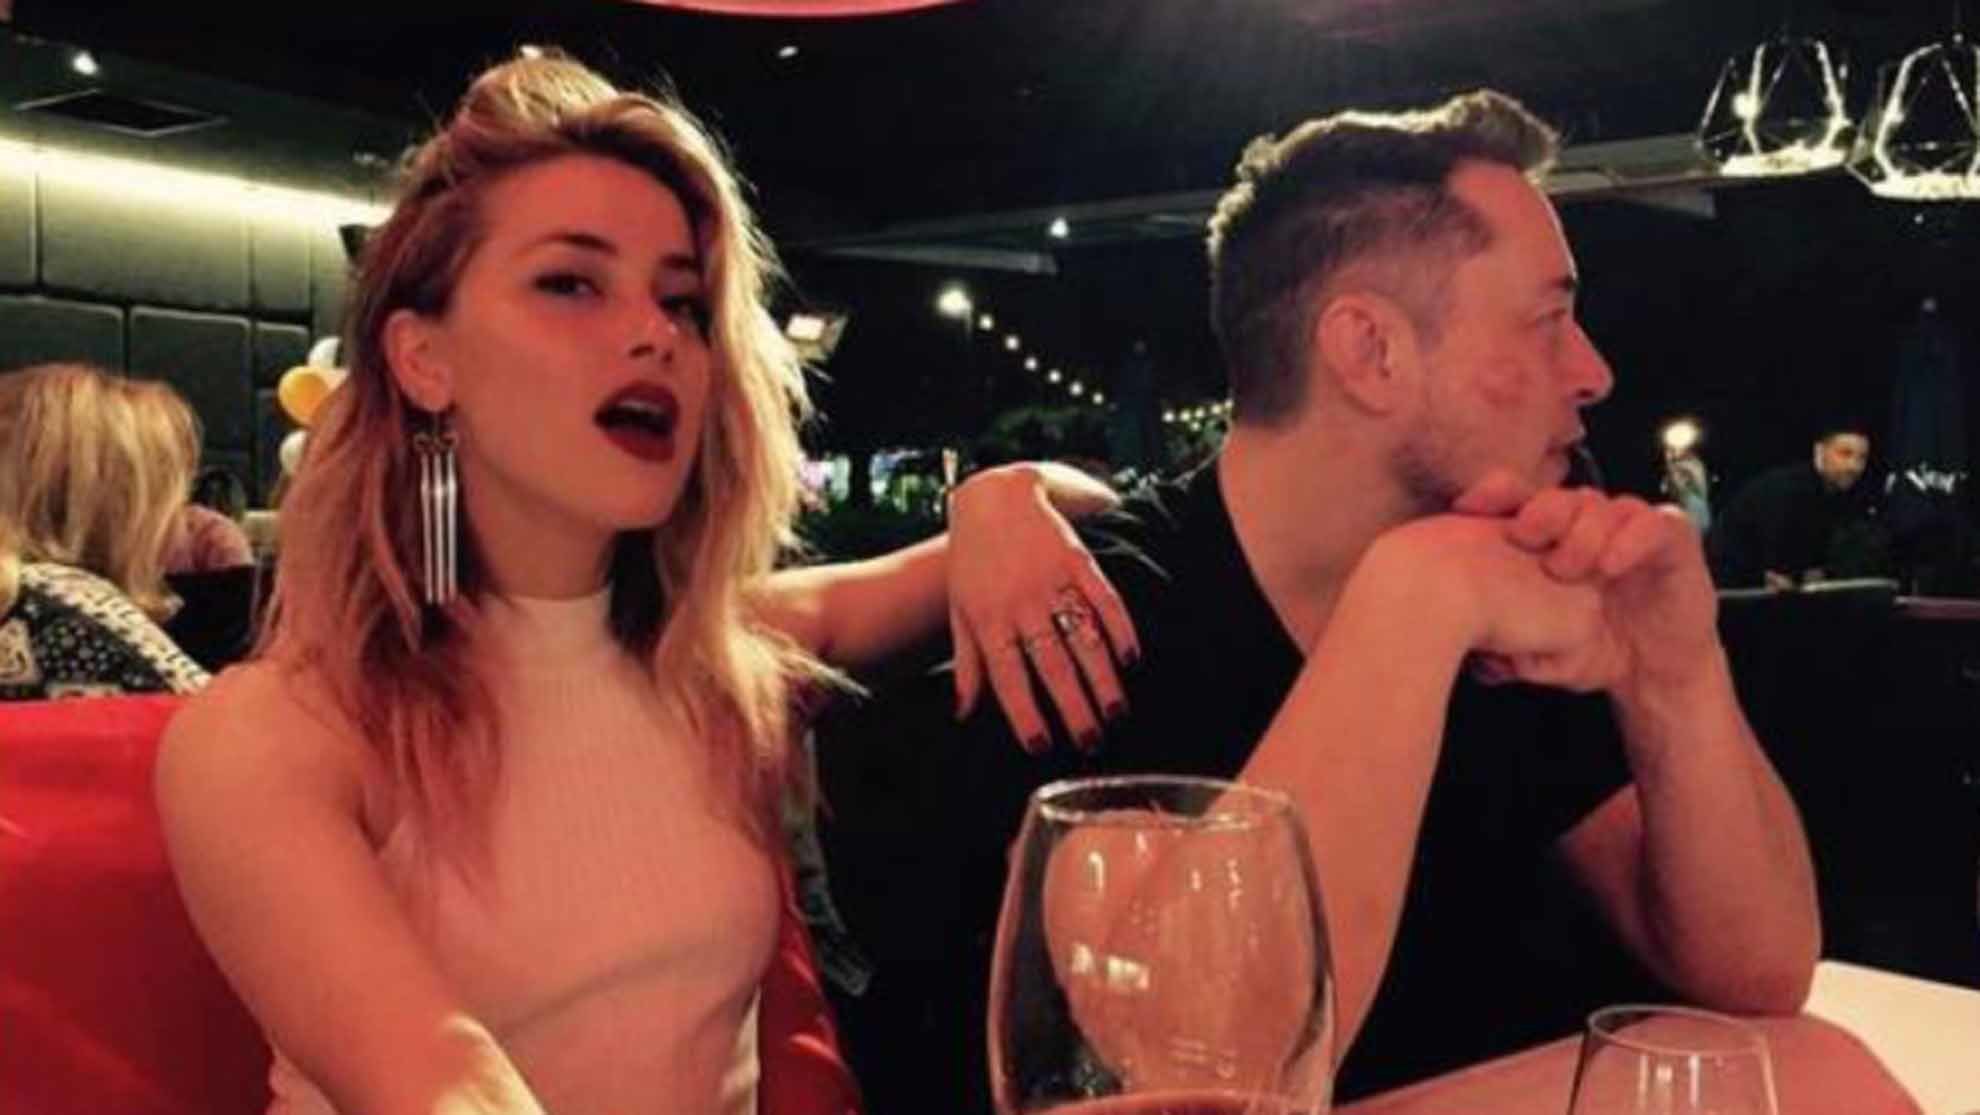 Elon Musk and Amber Heard: How was their relationship? | Marca